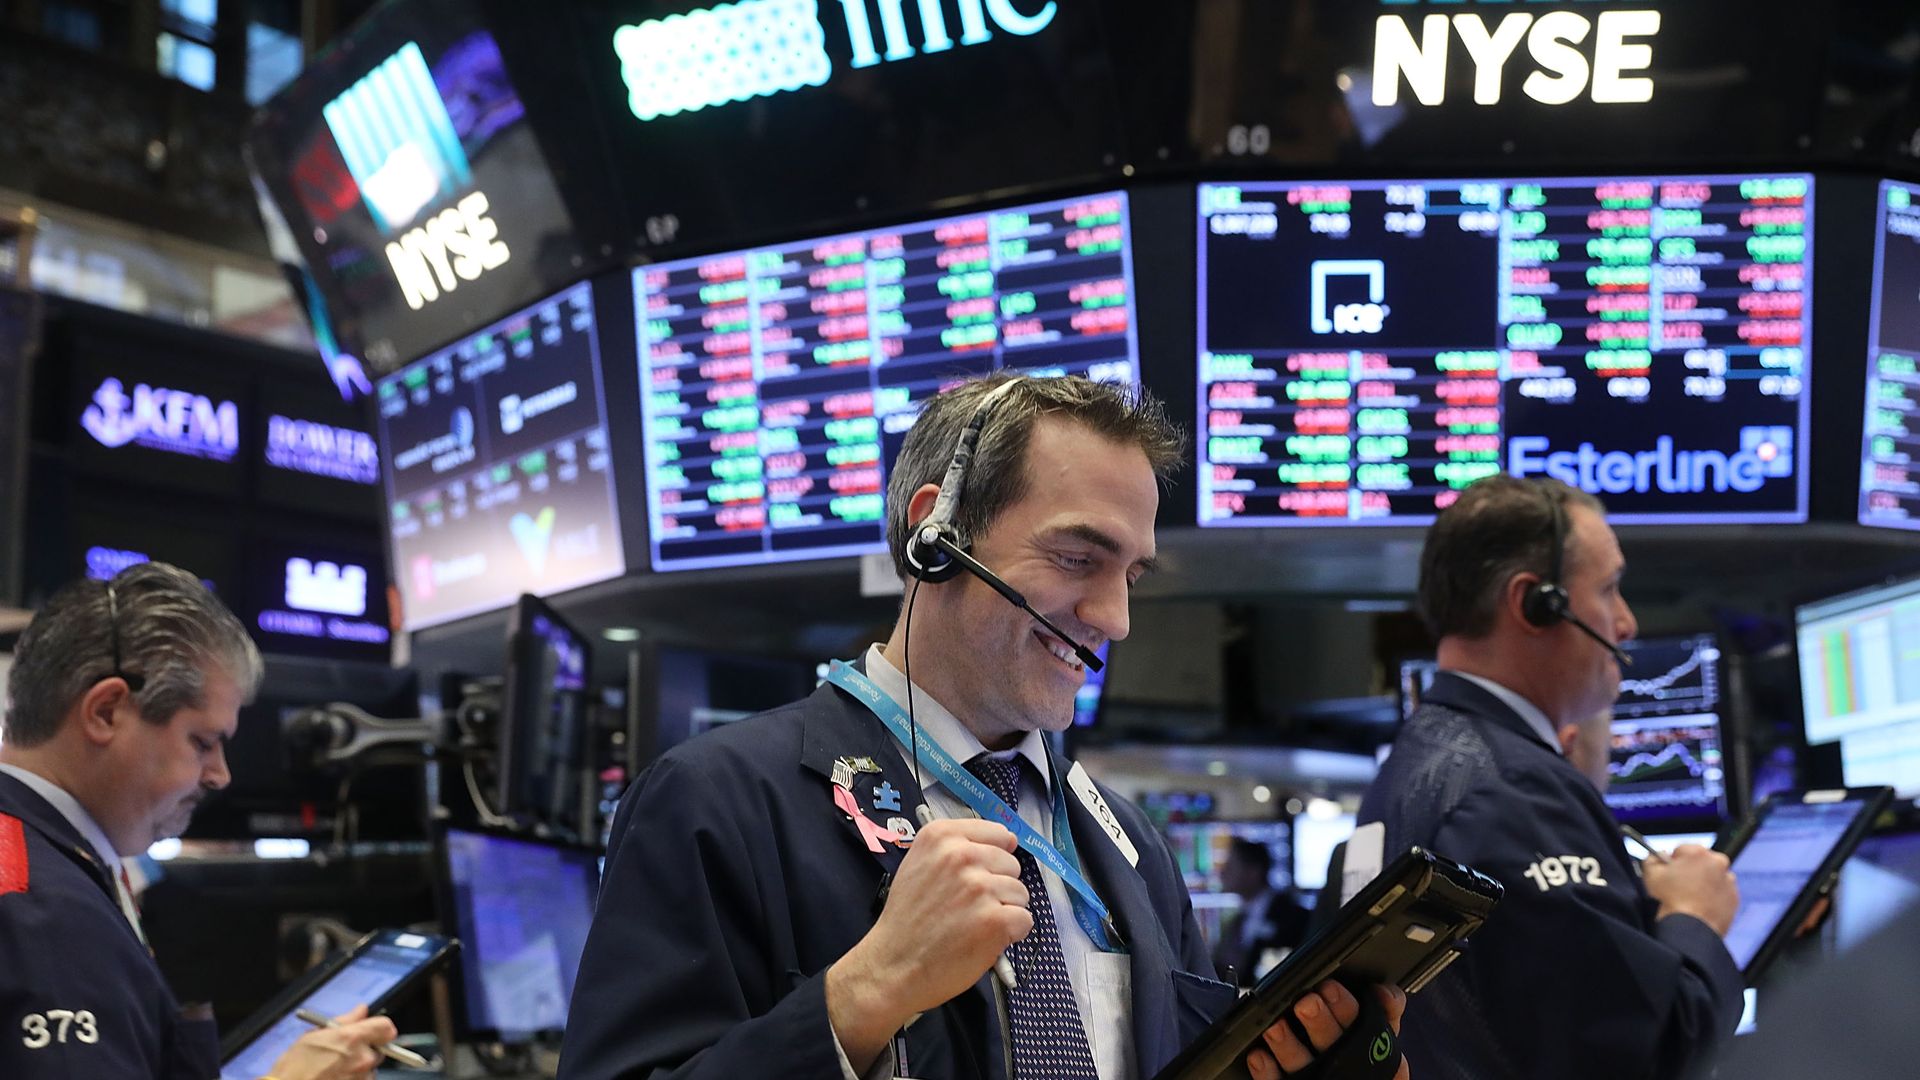 An excited trader on the floor of the stock exchange.